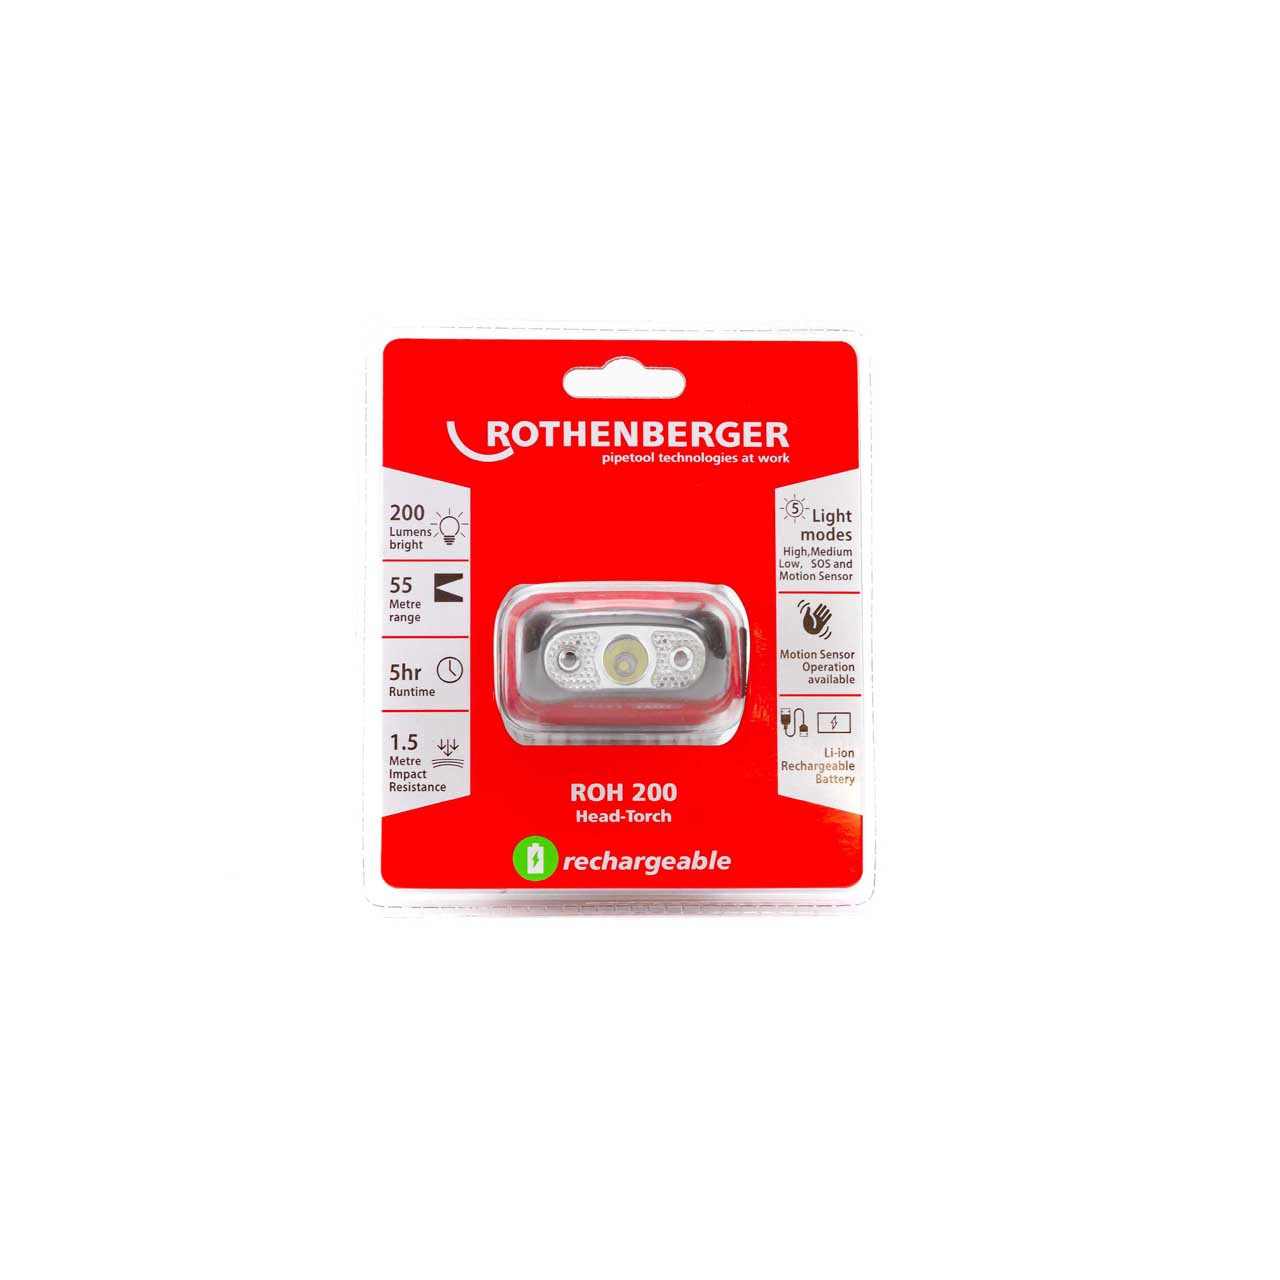 Photograph of Rothenberger ROH200 Compact Rechargeable Head Torch